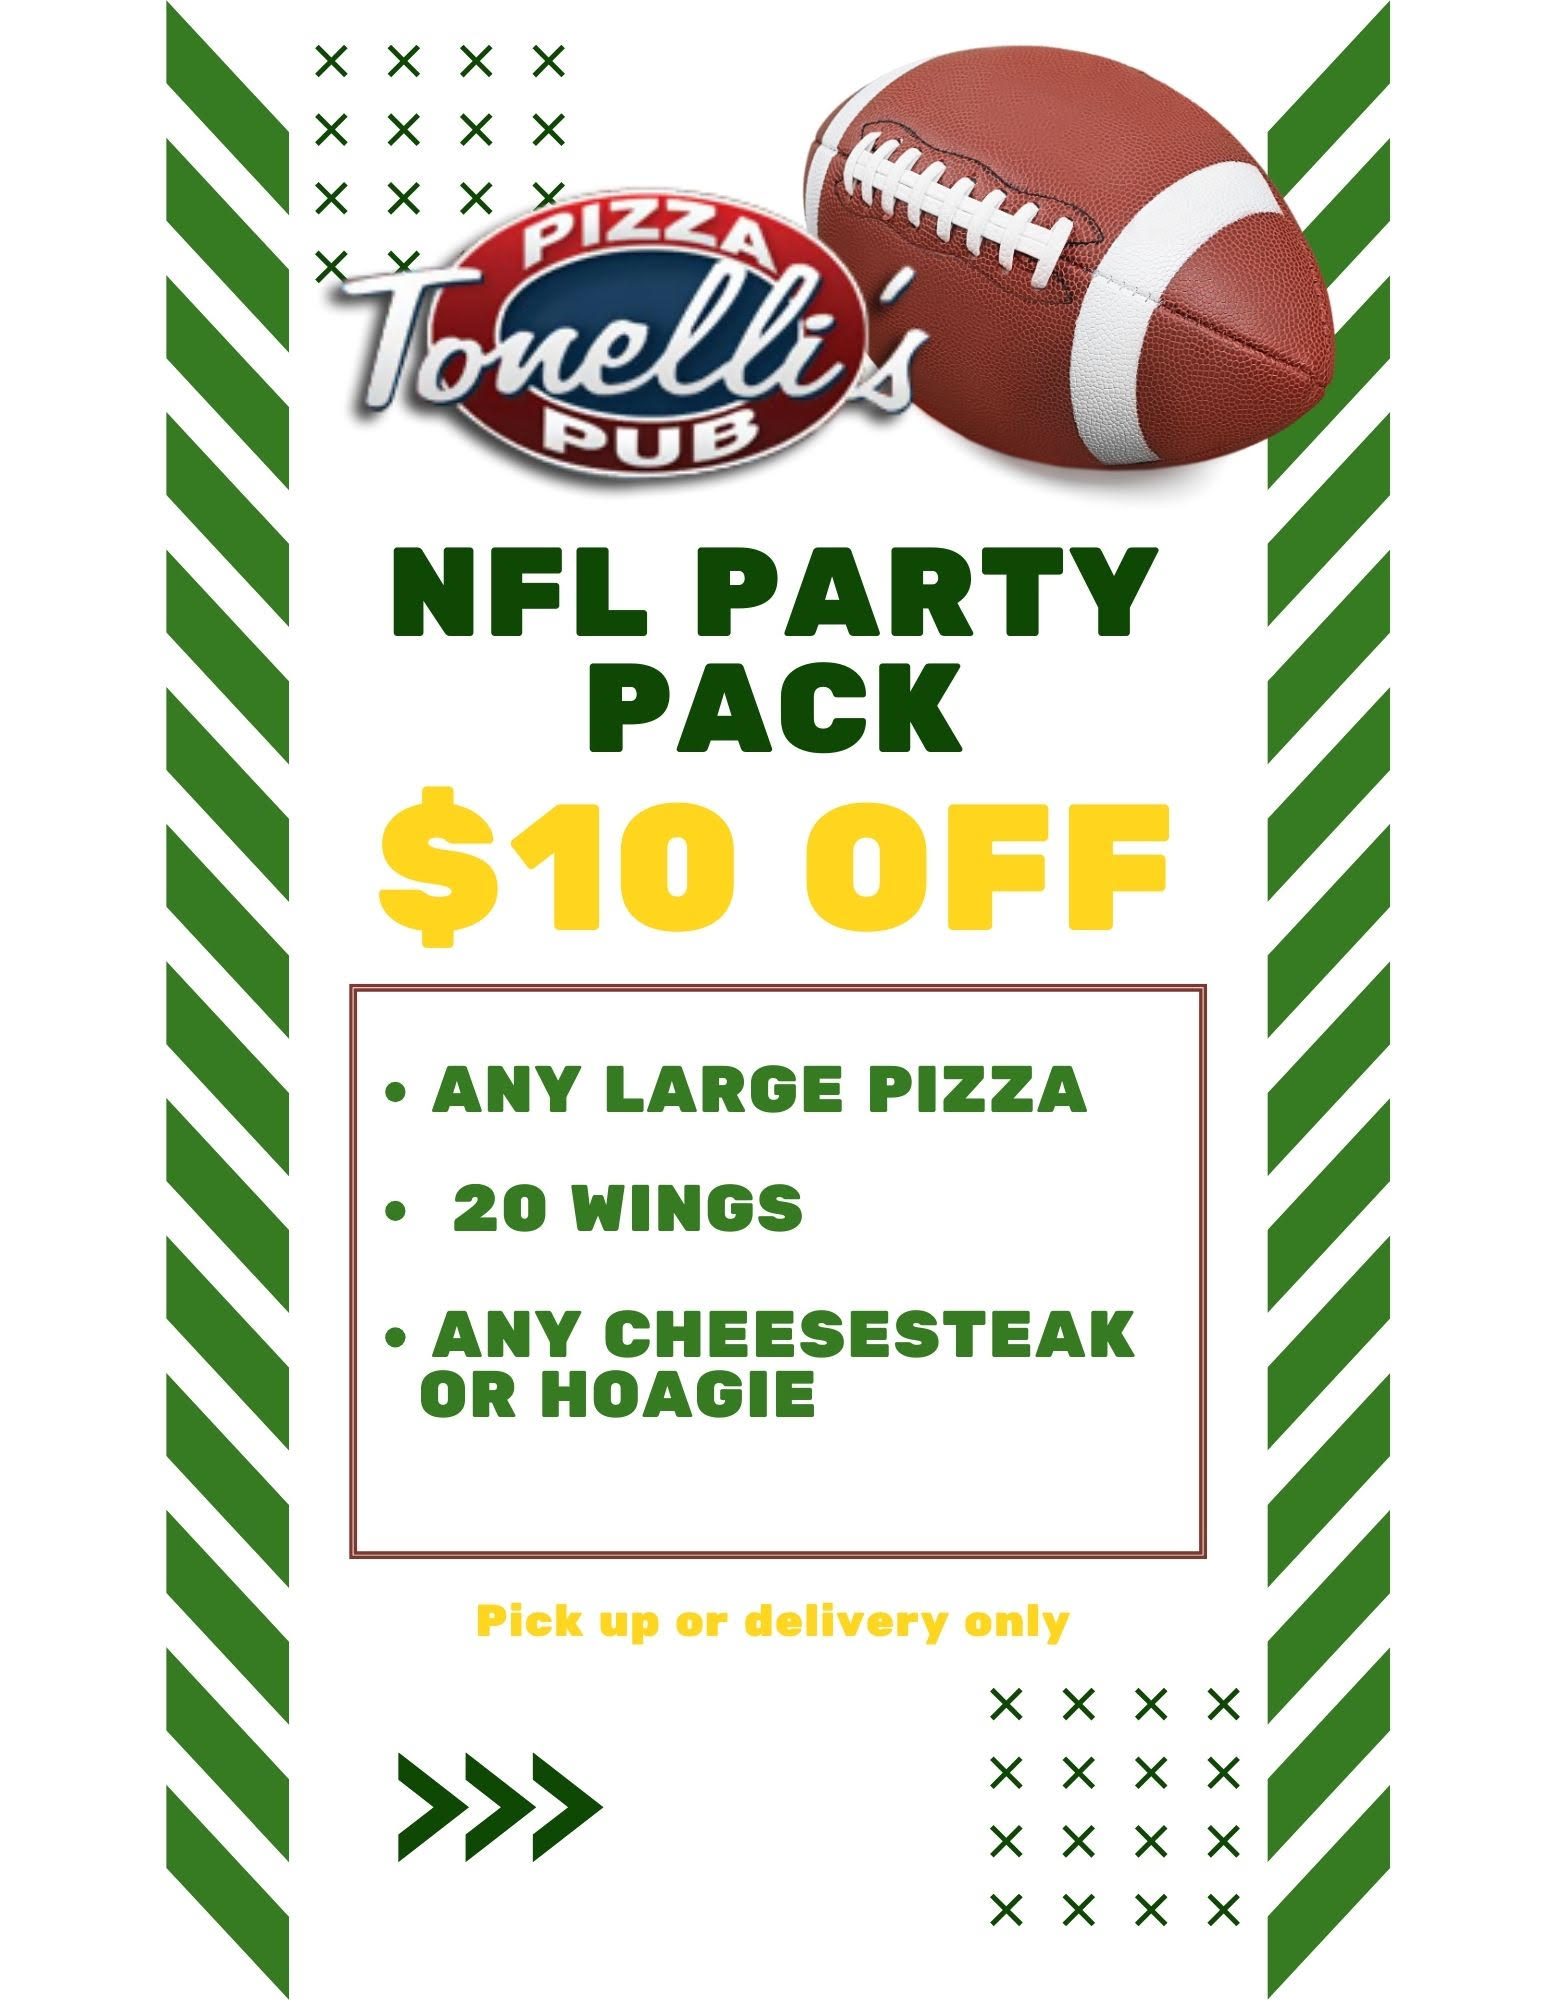 Nfl party pack flyer template.